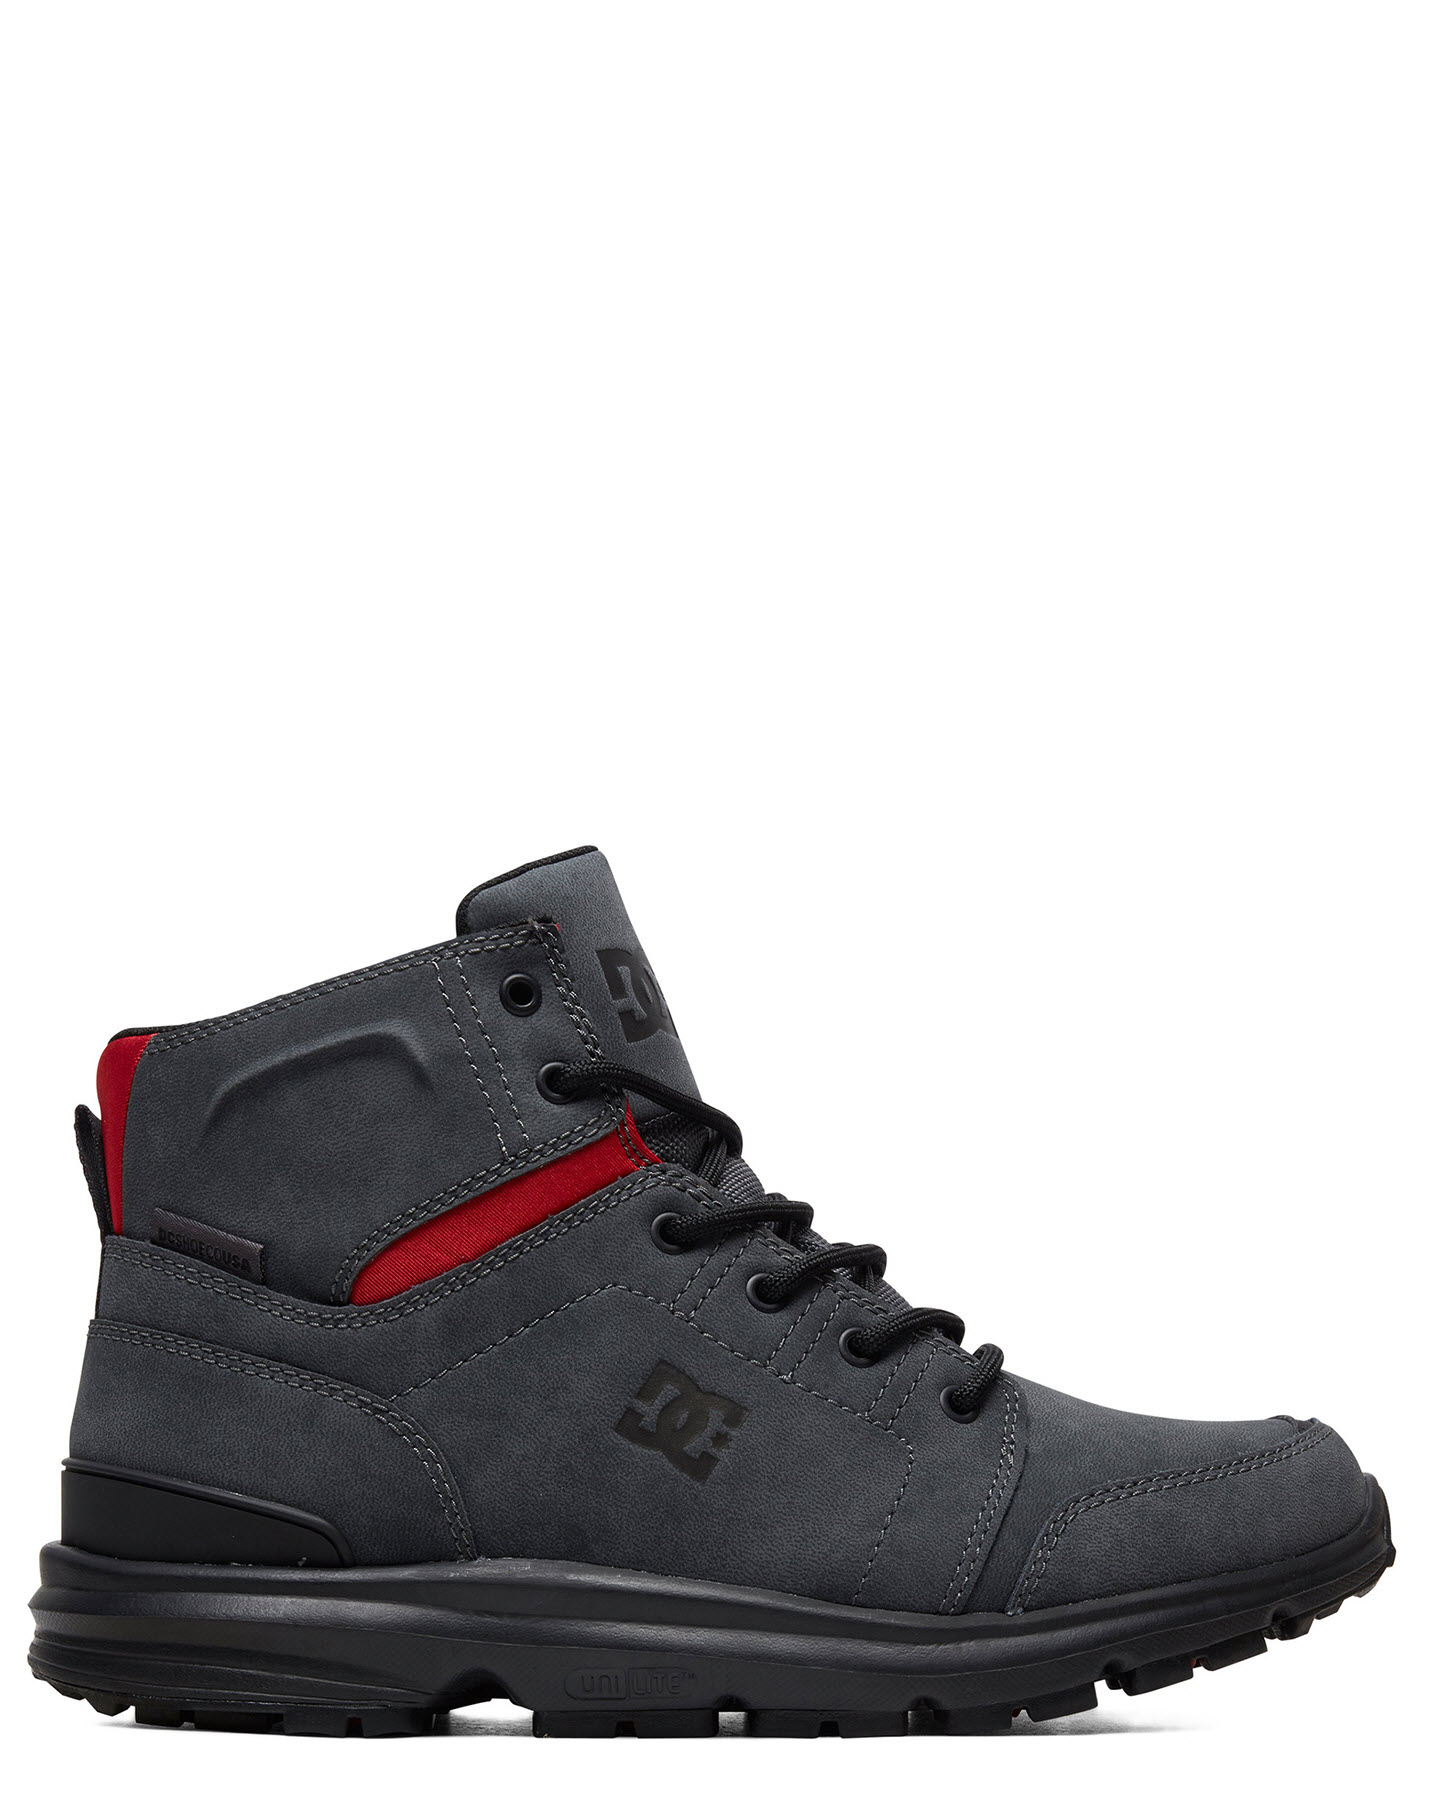 dc shoes red black